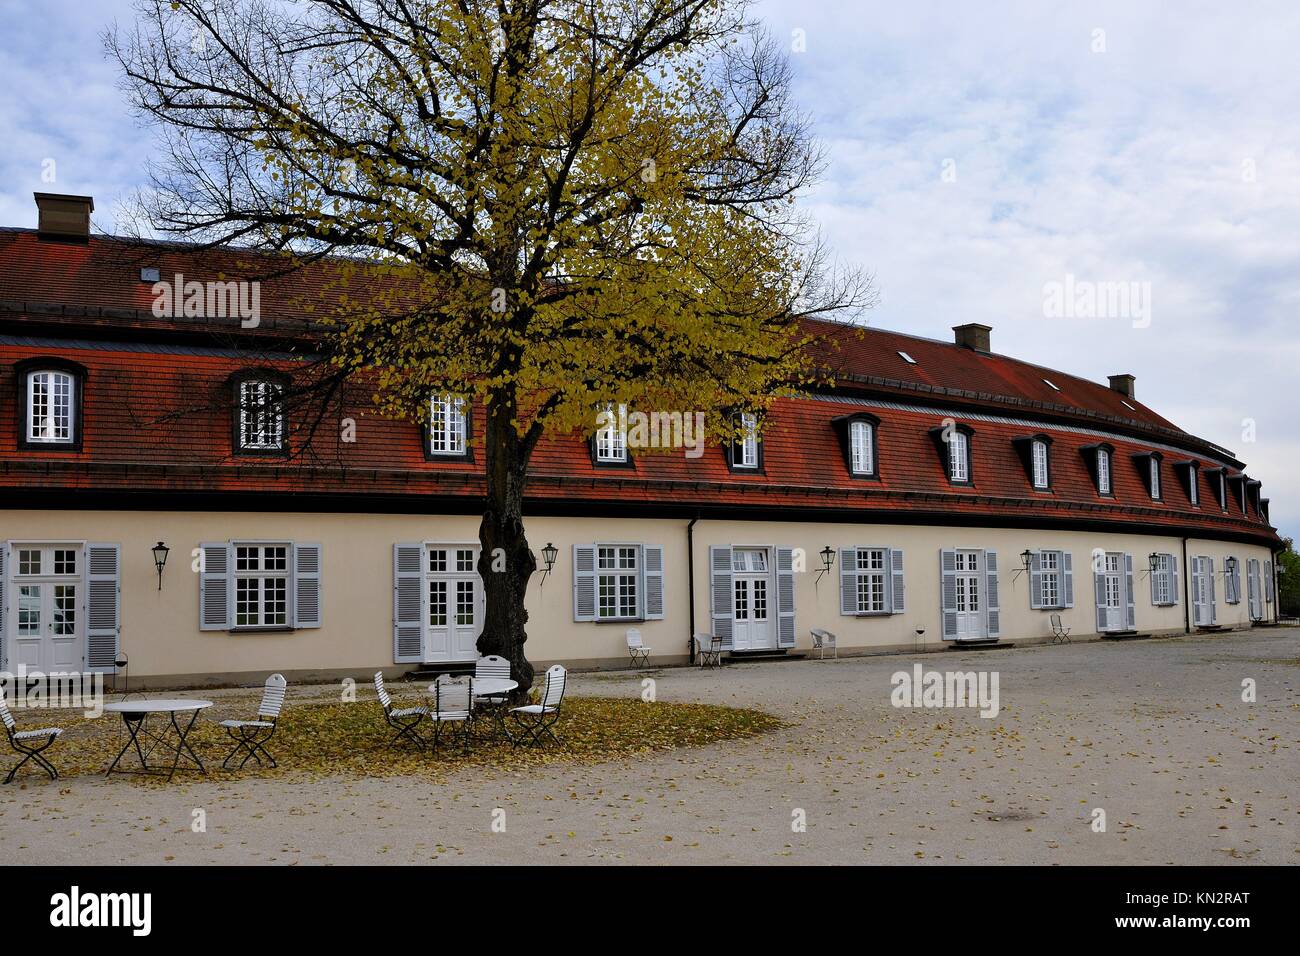 schloss solitude service buildings, stuttgart, view of the secondary service buildings of the famous castle located in a park in surroundings of the Stock Photo